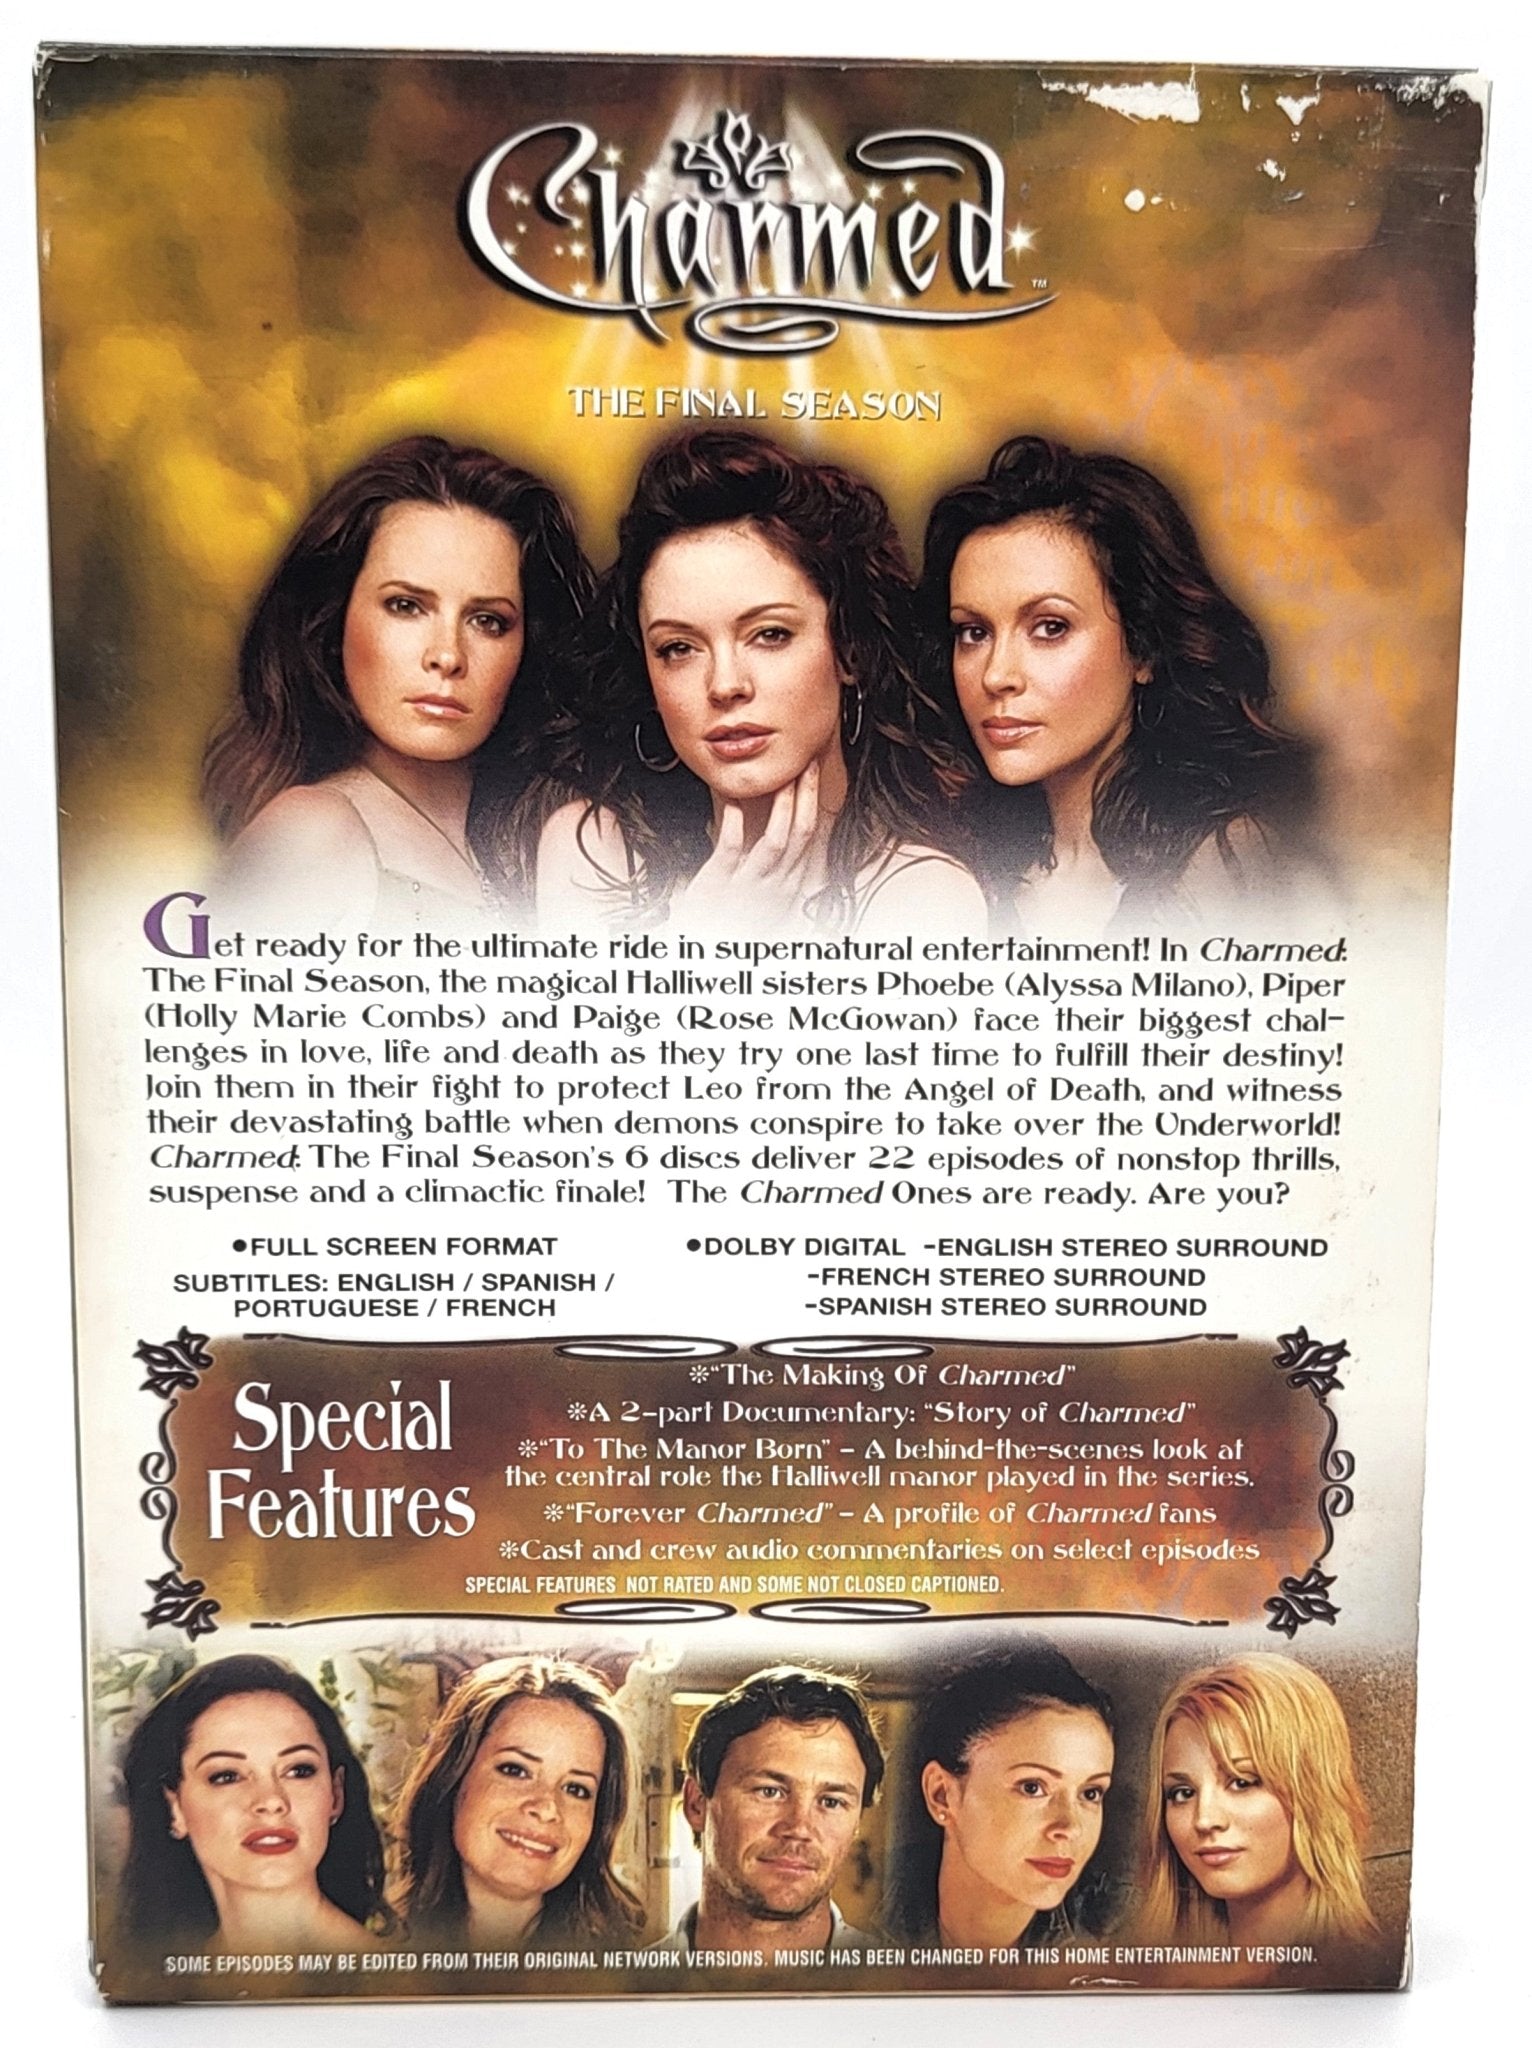 20th Century Fox Home Entertainment - Charmed | DVD | The Complete Eighth and Final Season - DVD - Steady Bunny Shop